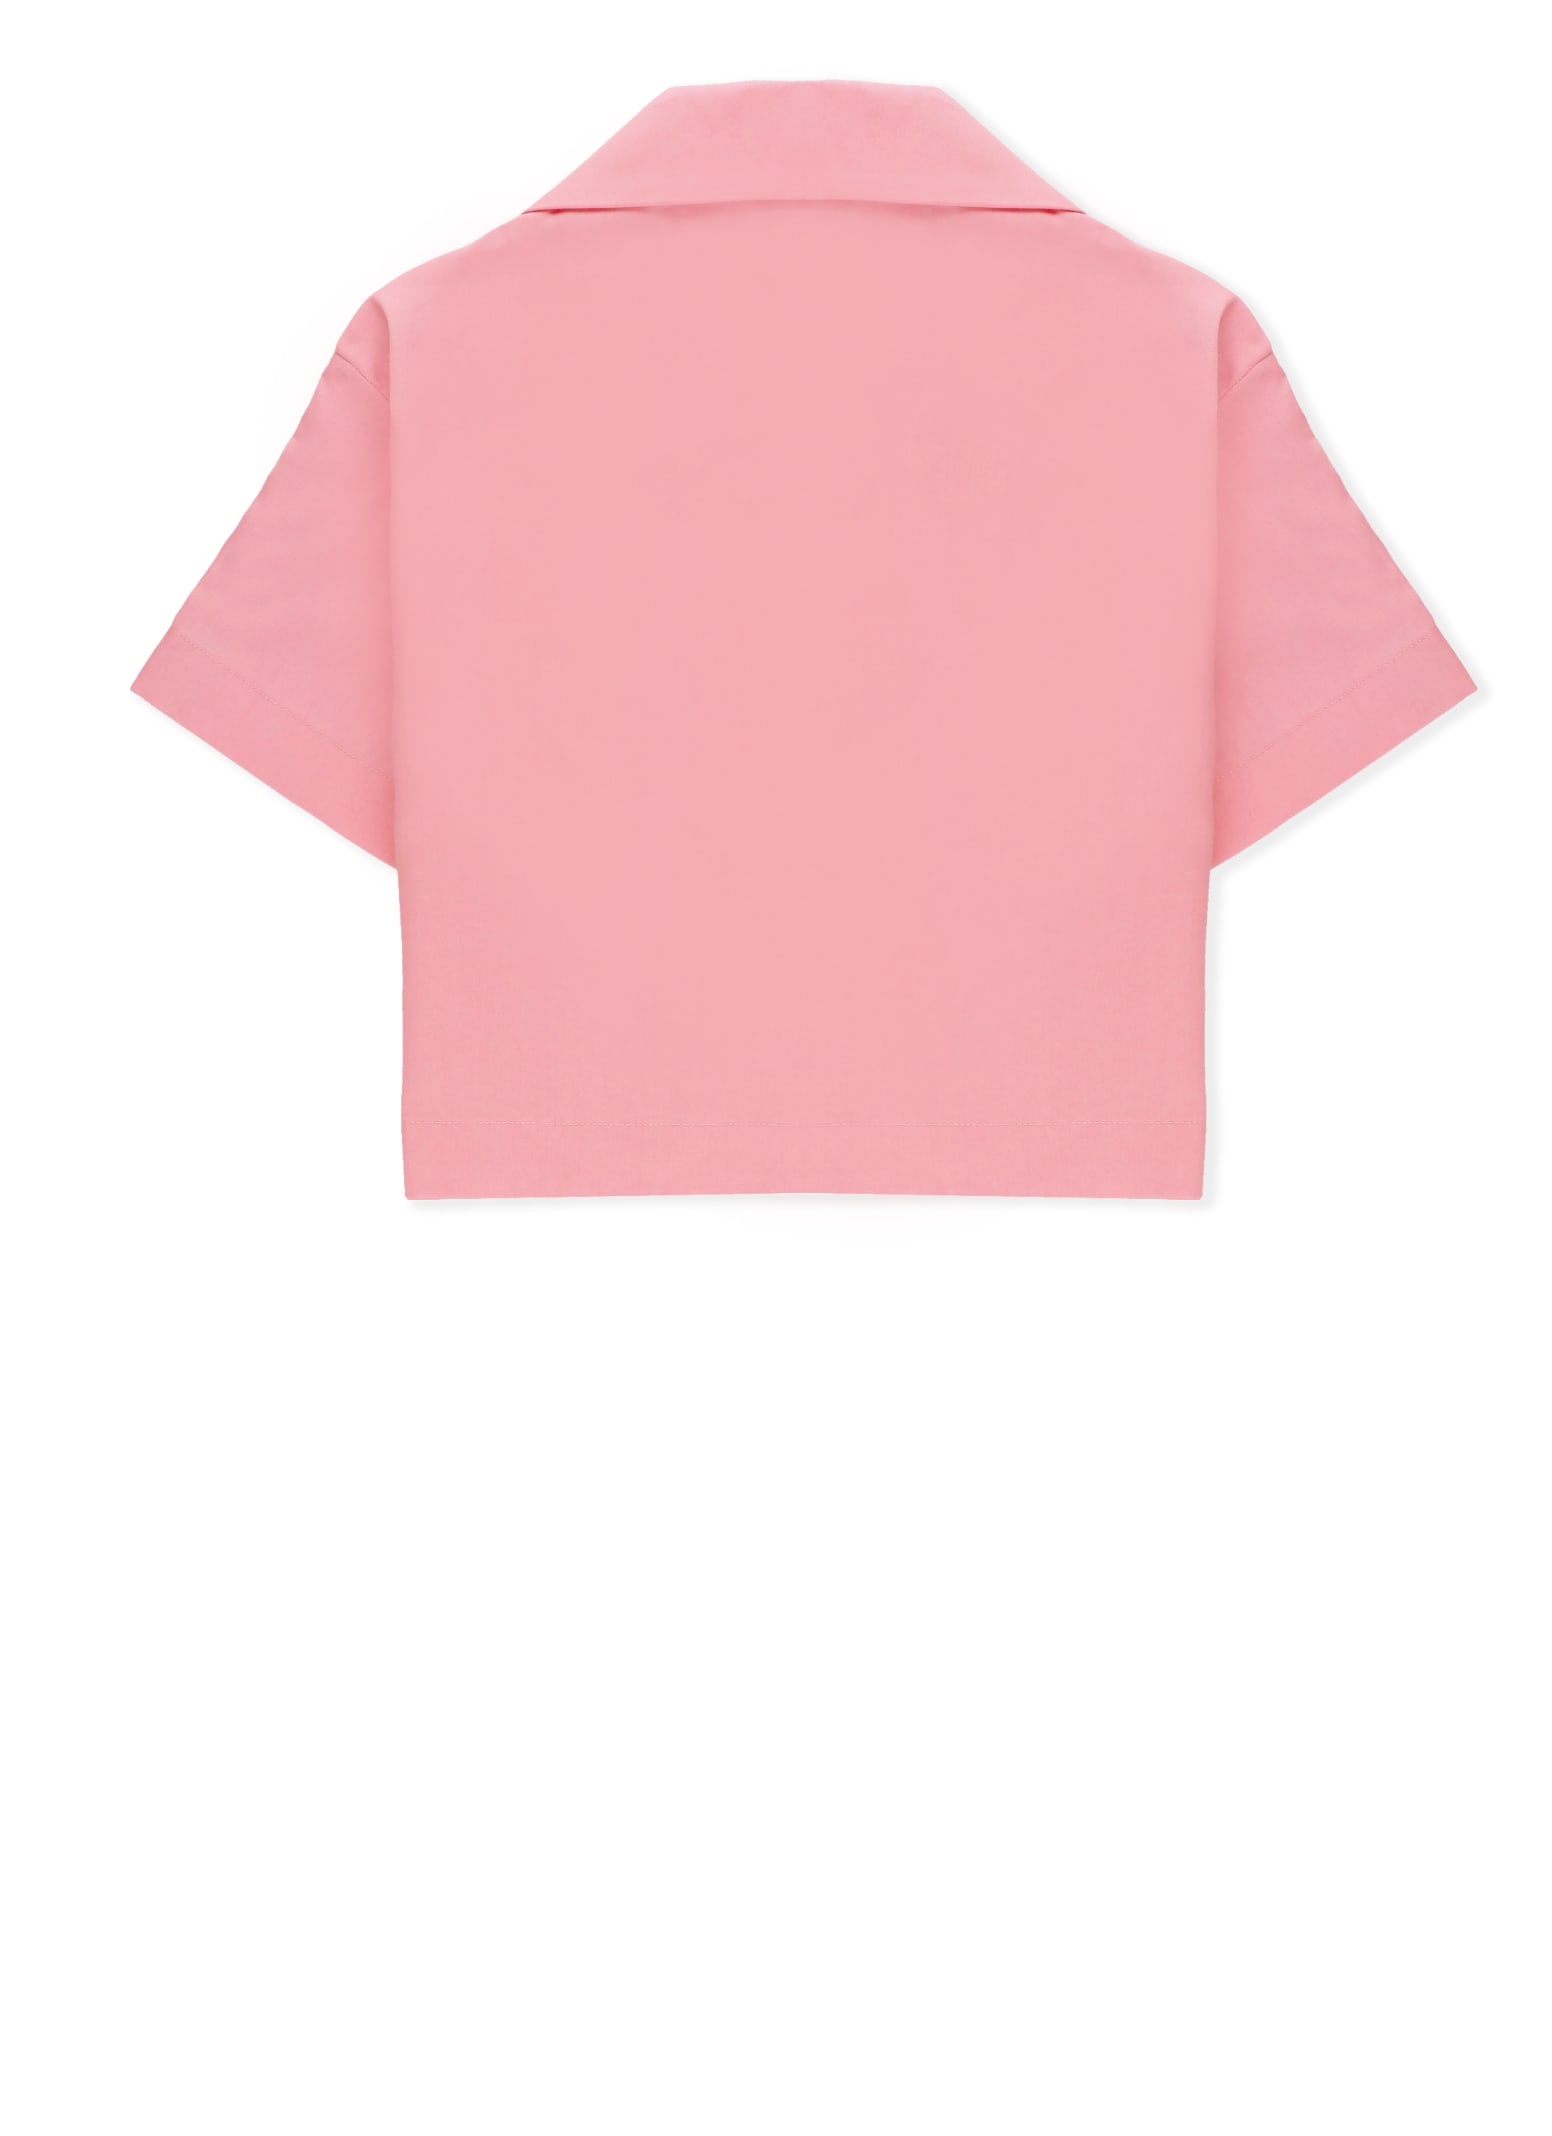 Shop Palm Angels Shirt With Logo In Pink